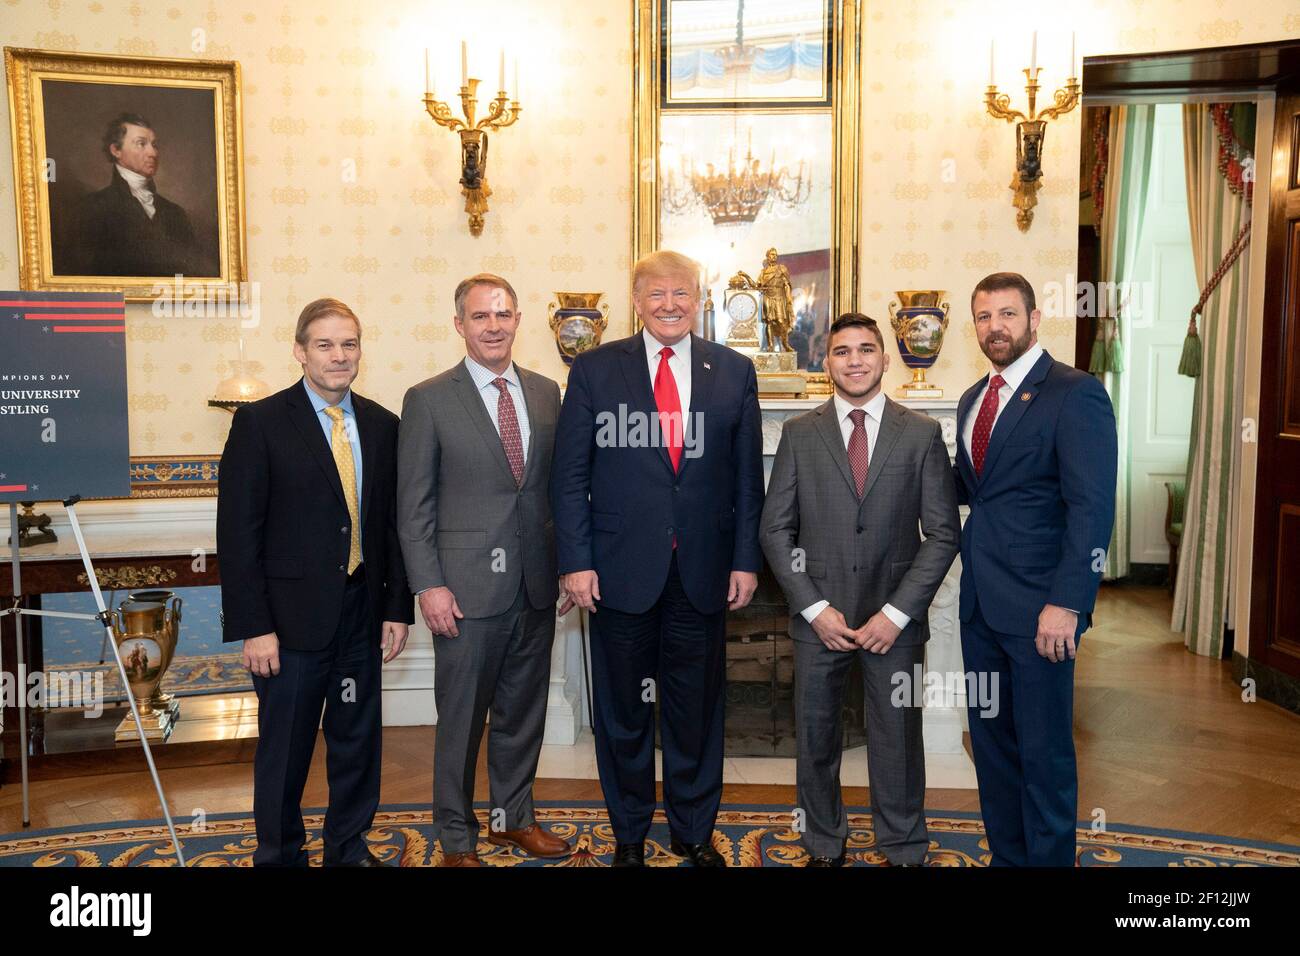 President Donald Trump poses with the 2019 NCAA Cornell University Men's Champion Wrestling team Friday Nov. 22 2019 during the NCAA Collegiate National Champions Day in the Blue Room of the White House. Stock Photo